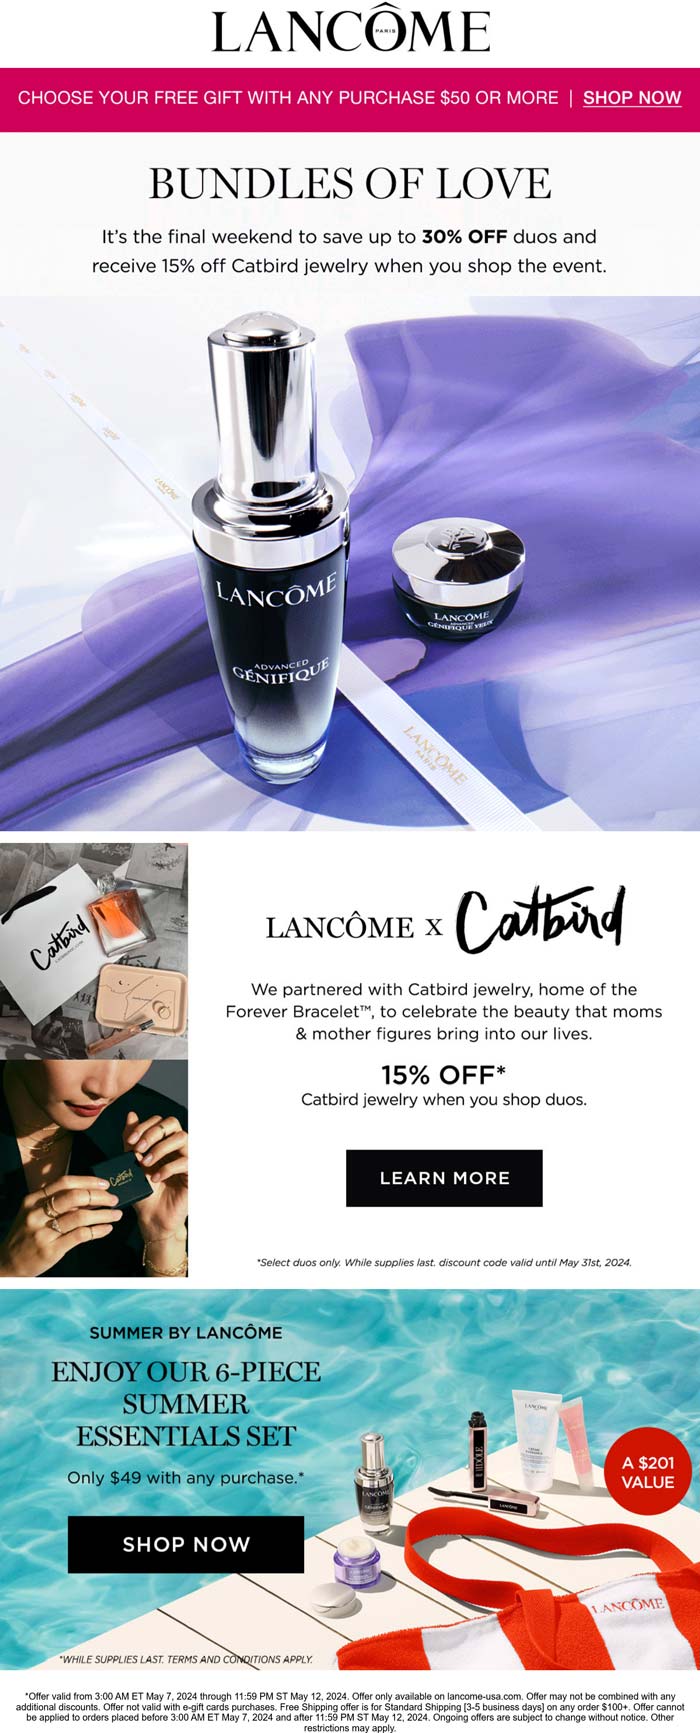 Lancome stores Coupon  Free 6pc on $49 + 30% off duos at Lancome #lancome 